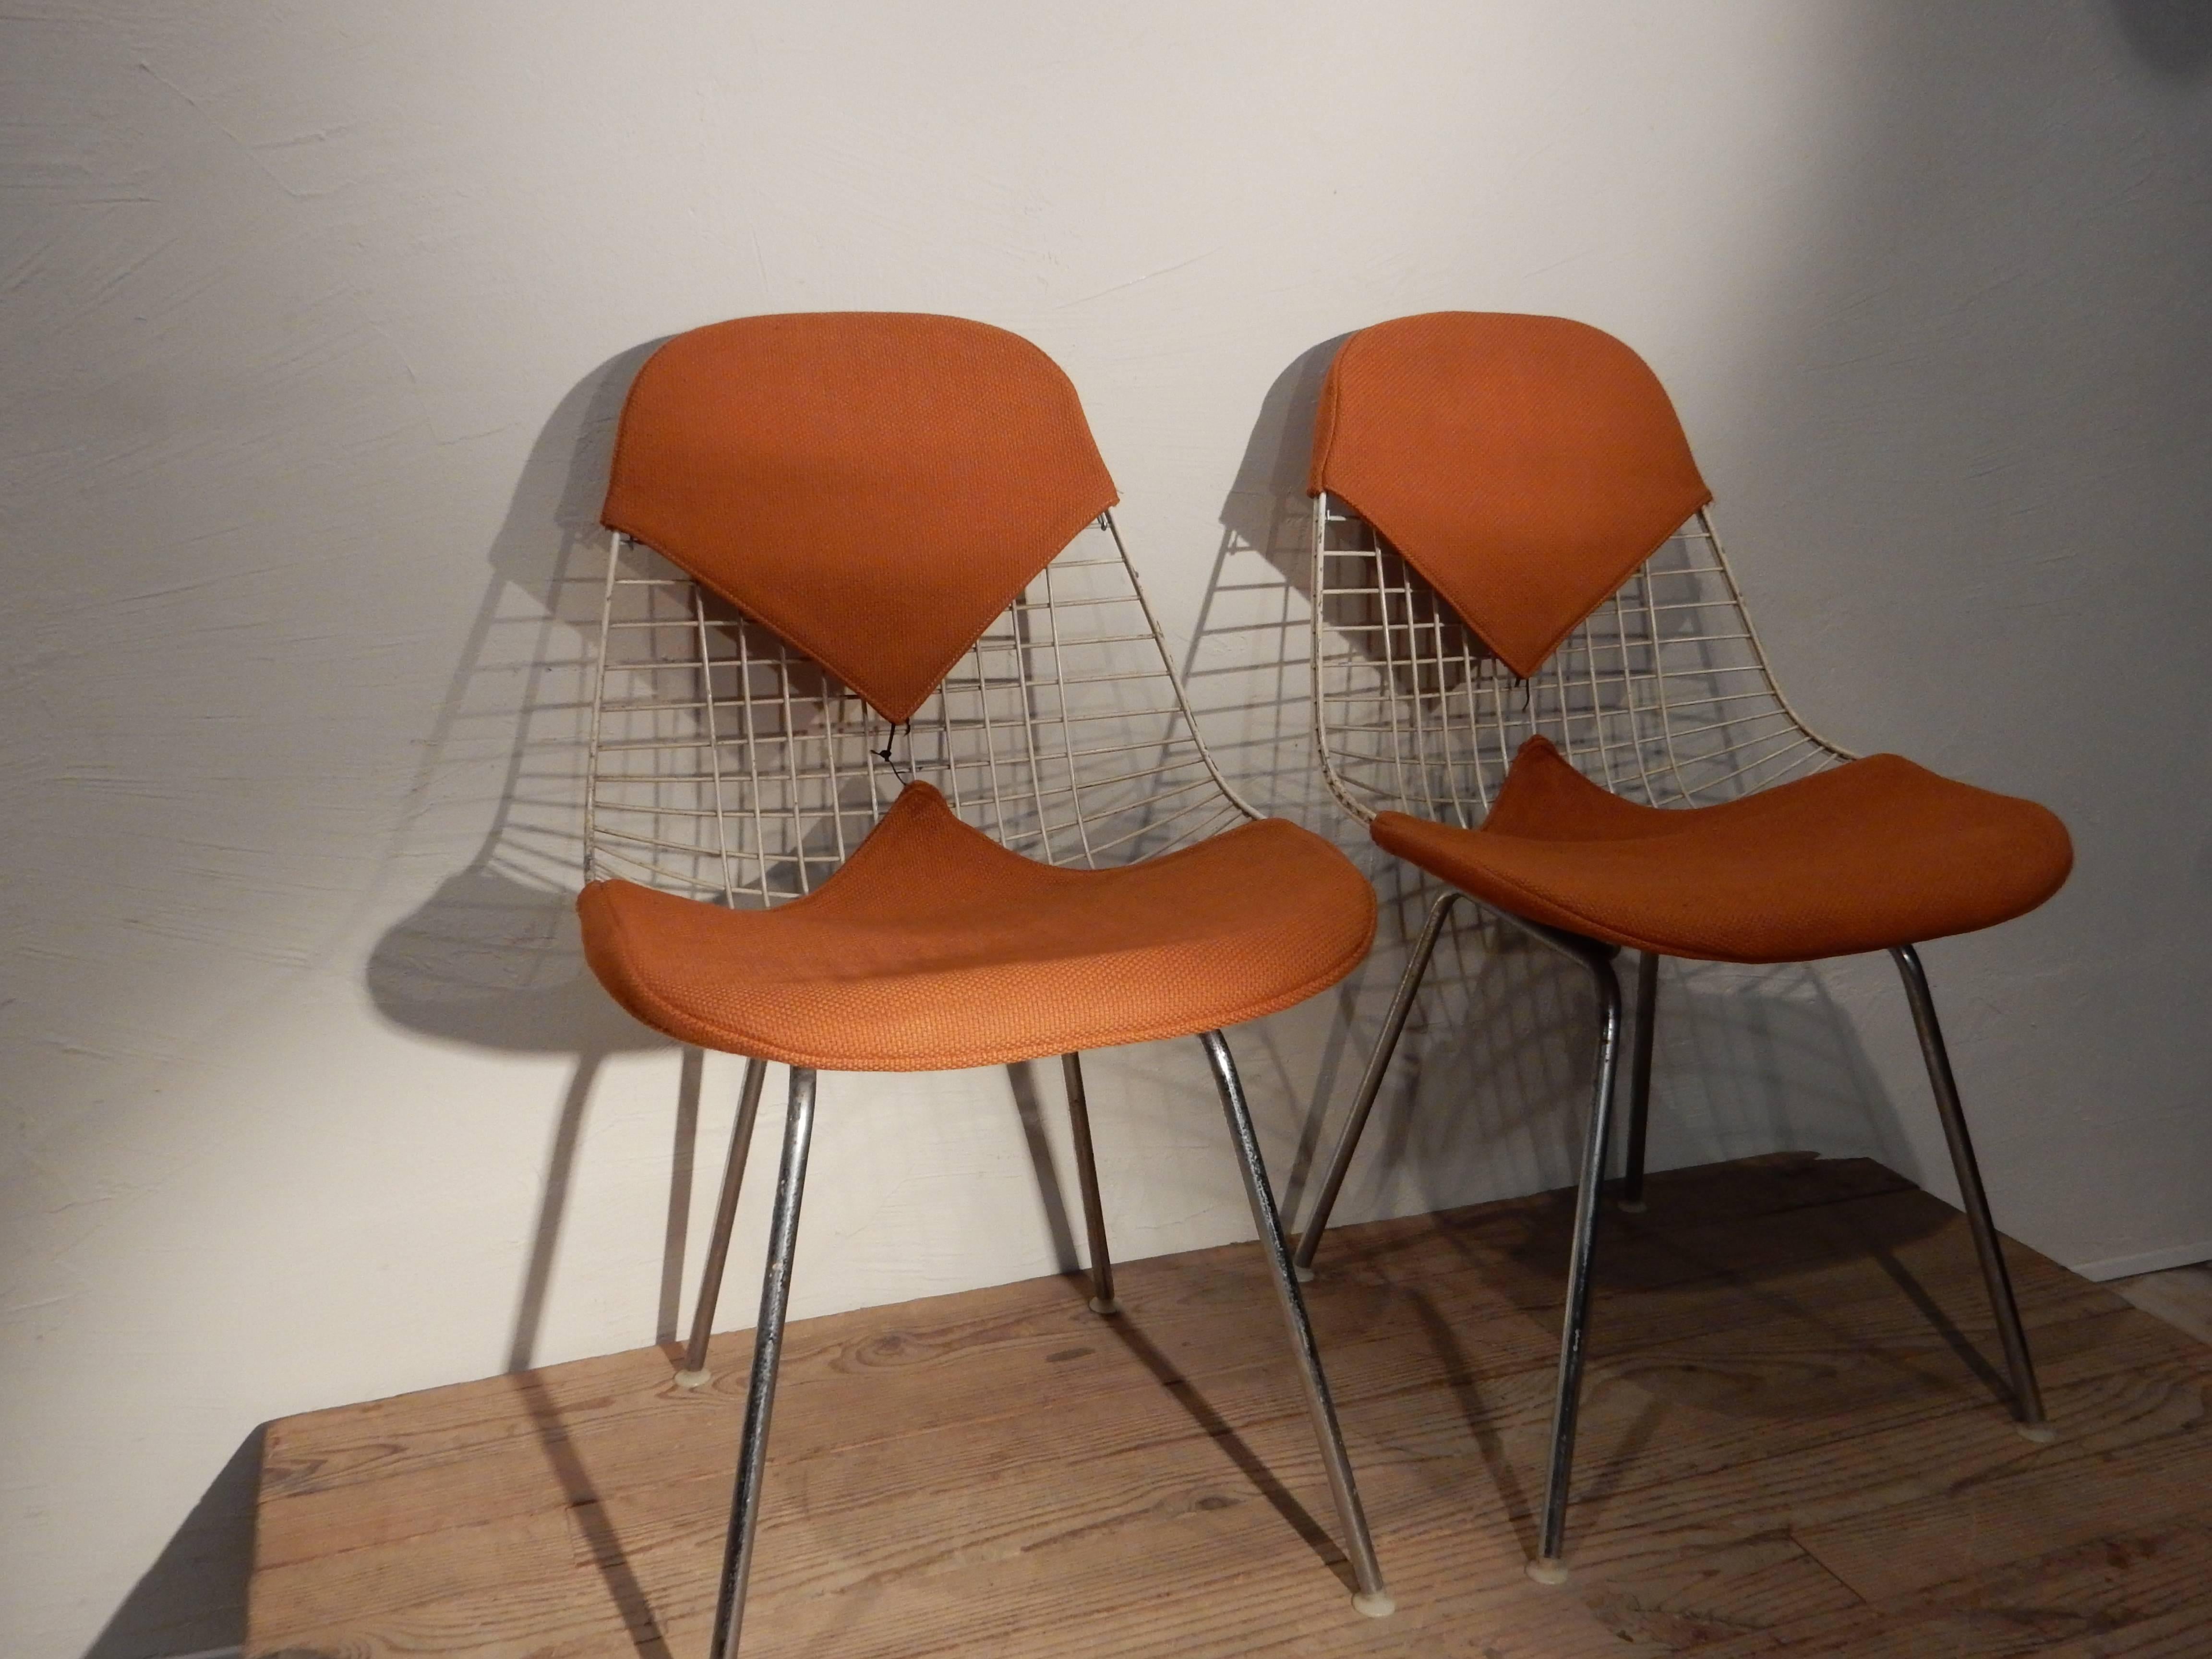 A pair of wire chairs by Carles and Ray Eames edited by Herman Miller, circa 1960 with original orange upholstery.